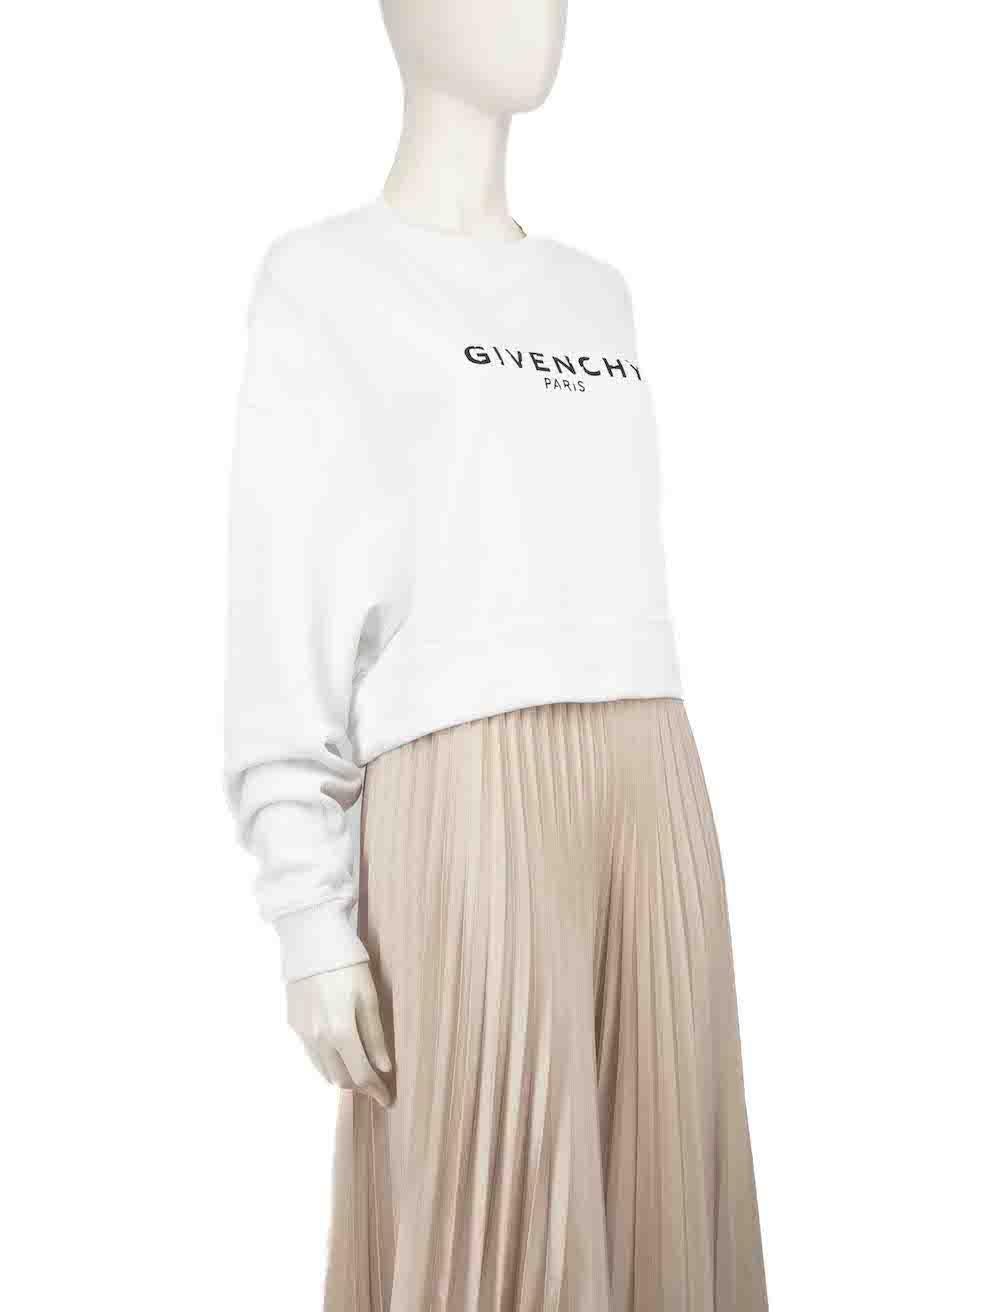 CONDITION is Good. Minor wear to sweatshirt is evident. Light discolouration to front hem, both sleeves, rear left side and neckline on this used Givenchy designer resale item.
 
 
 
 Details
 
 
 White
 
 Cotton
 
 Sweatshirt
 
 Cracked logo print